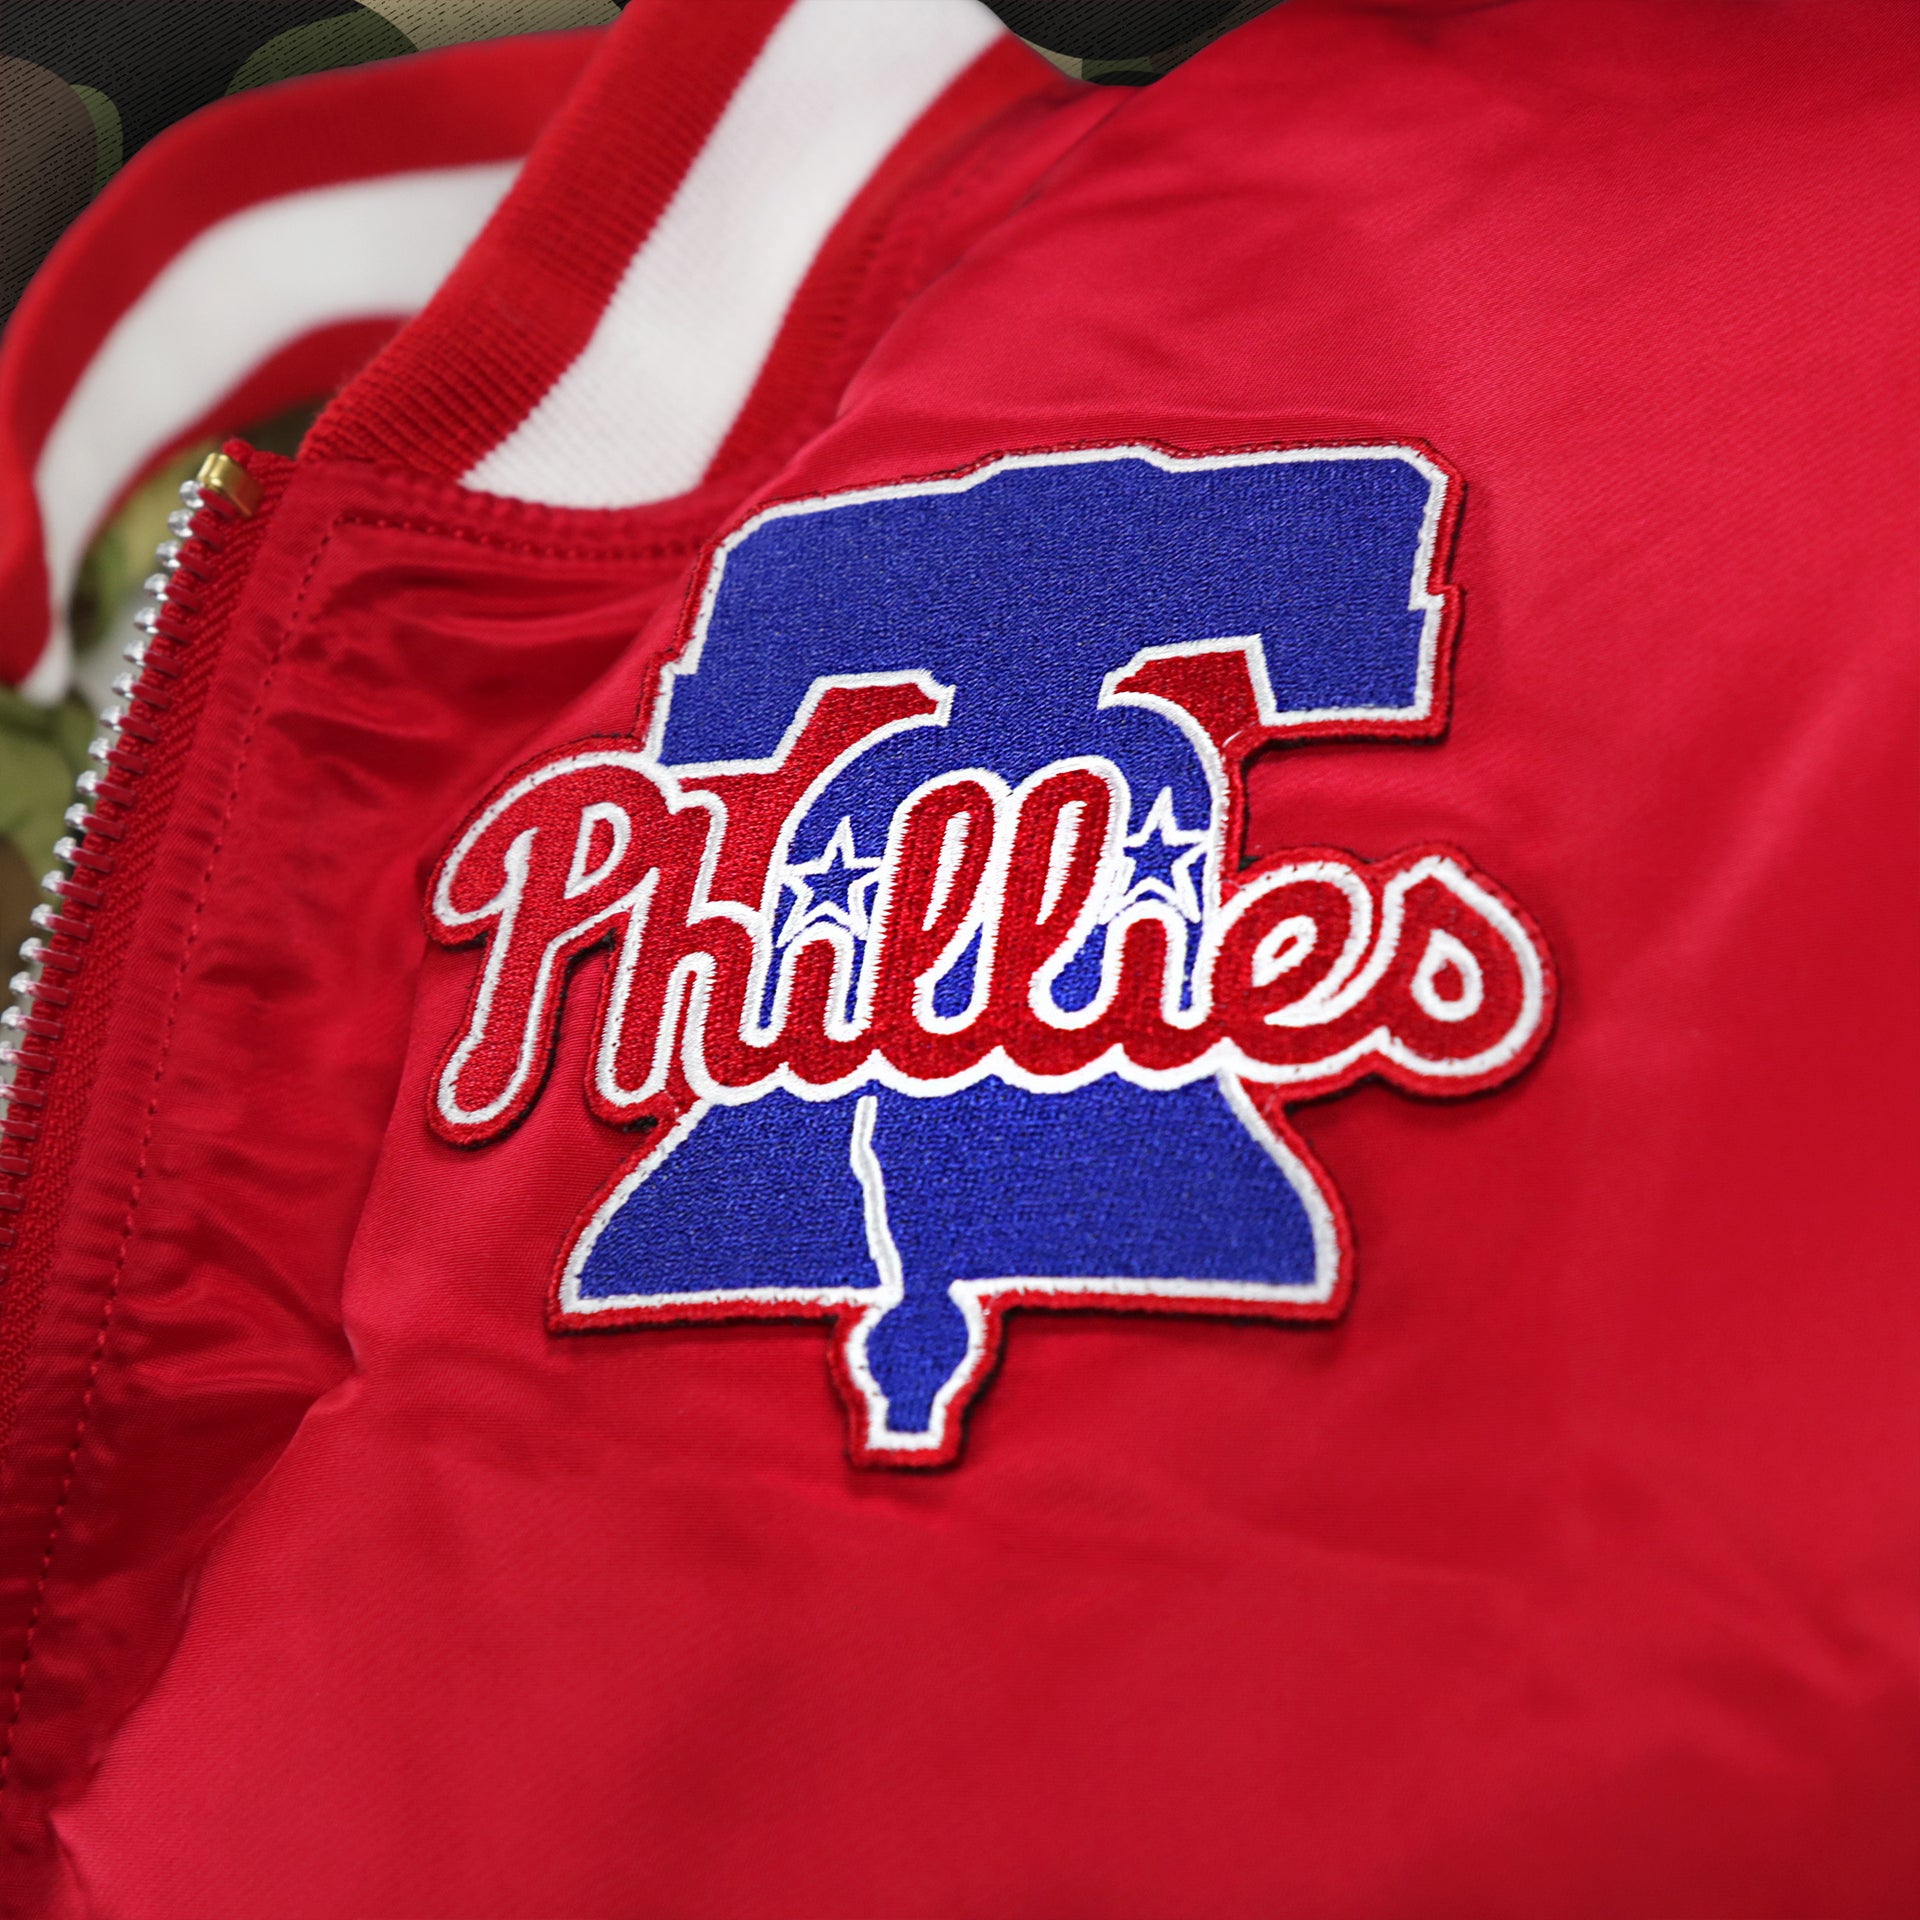 The Phillies Liberty Bell Logo on the Philadelphia Phillies MLB Patch Alpha Industries Reversible Bomber Jacket With Camo Liner | Red Bomber Jacket